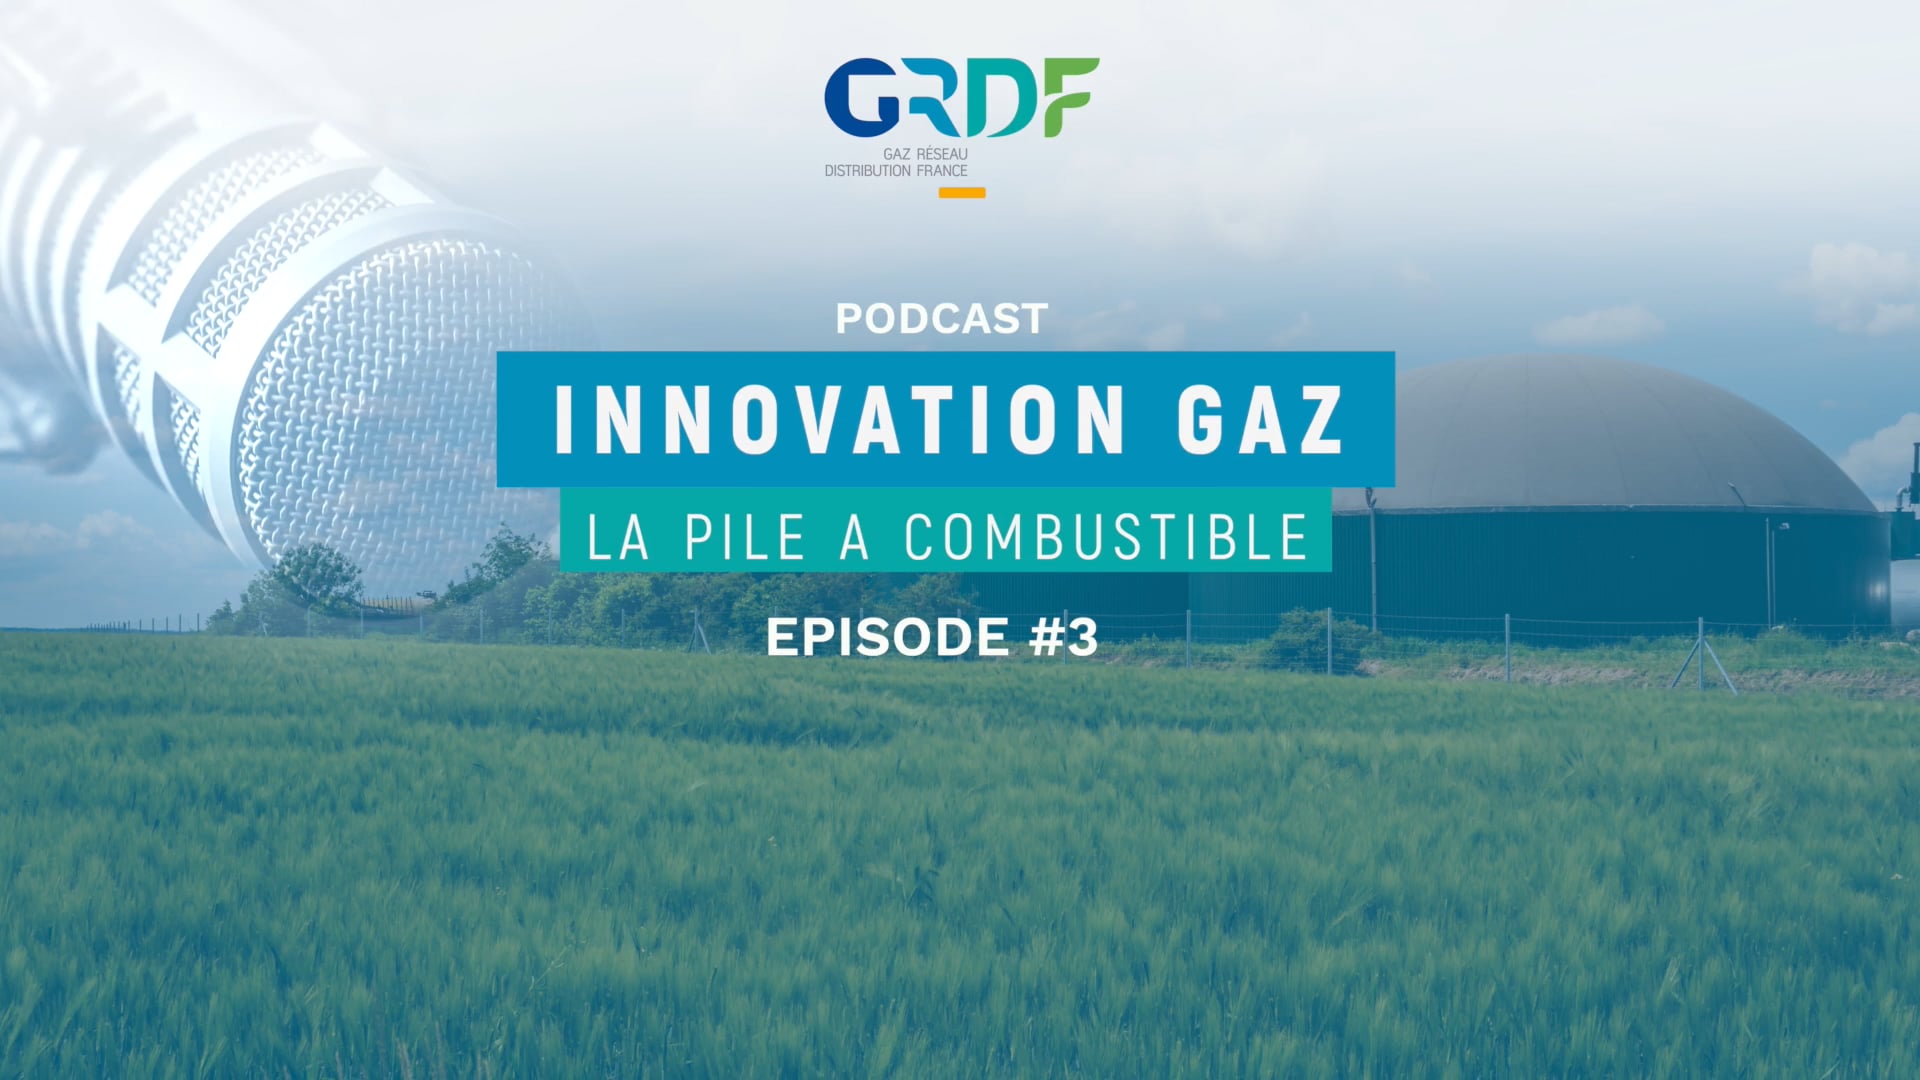 Creative-Story_Podcast-GRDF-laurent.mp4